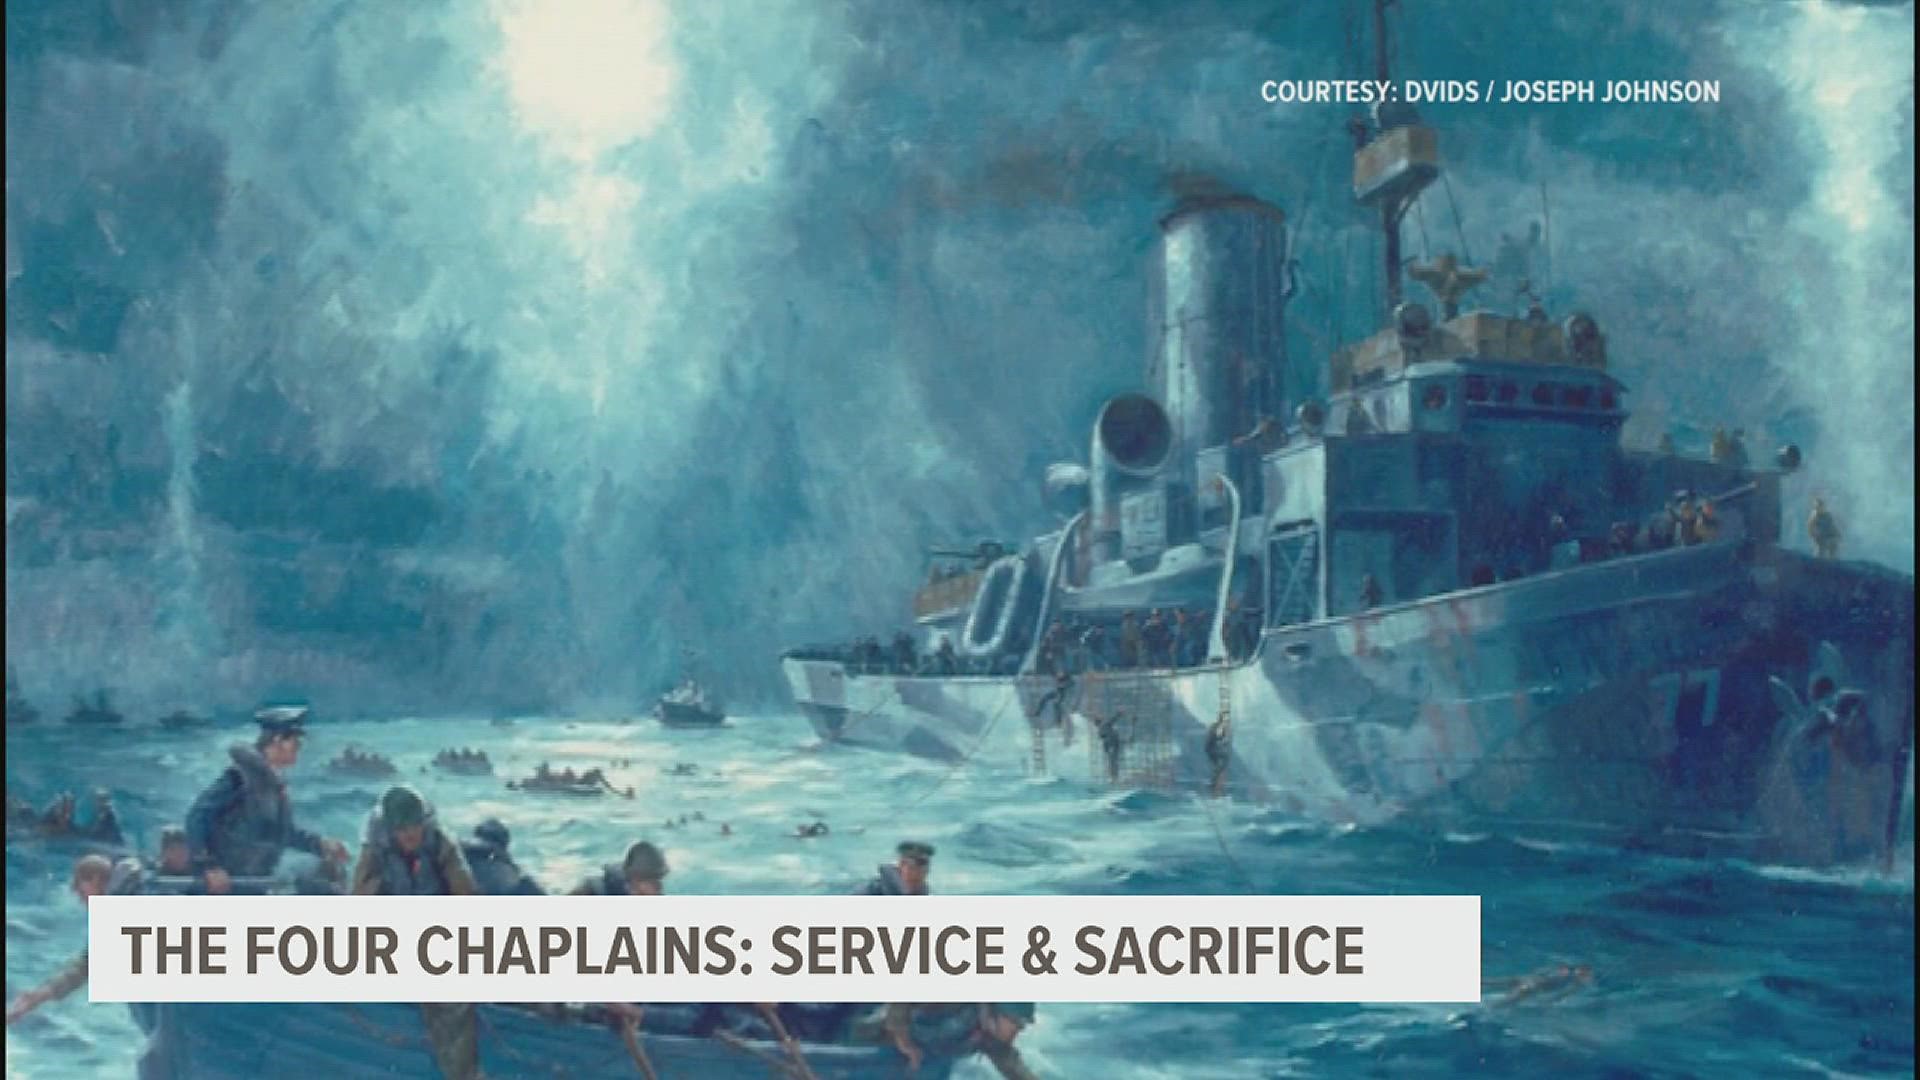 The organization's mission follows the ideals the Chaplains displayed: service and sacrifice.